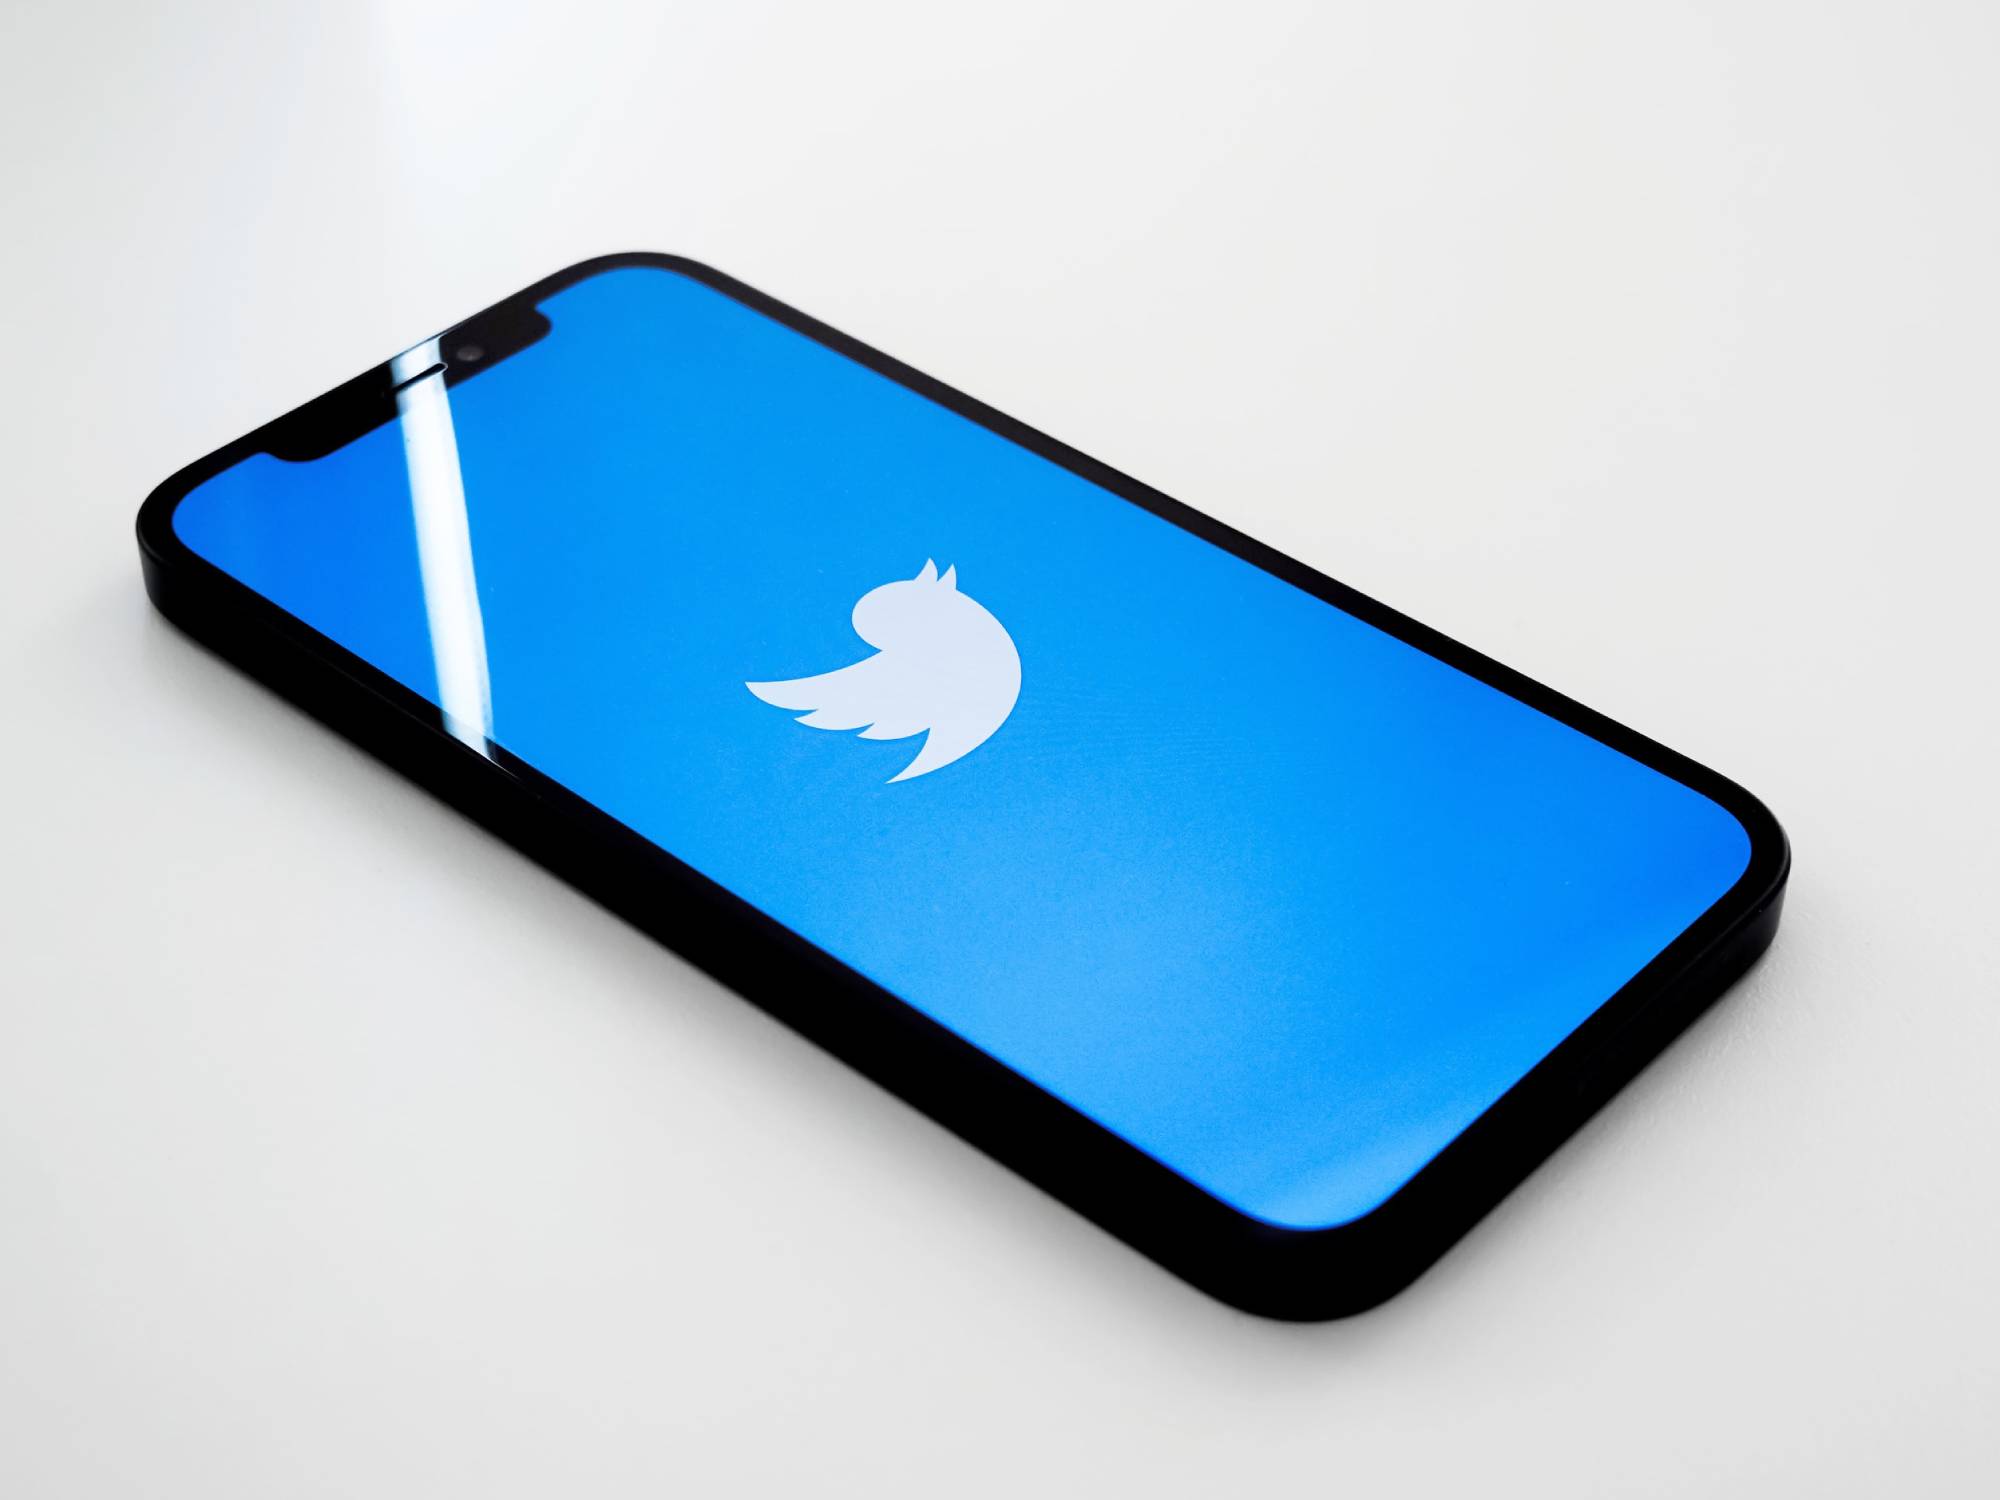 phone on desk showing twitter icon